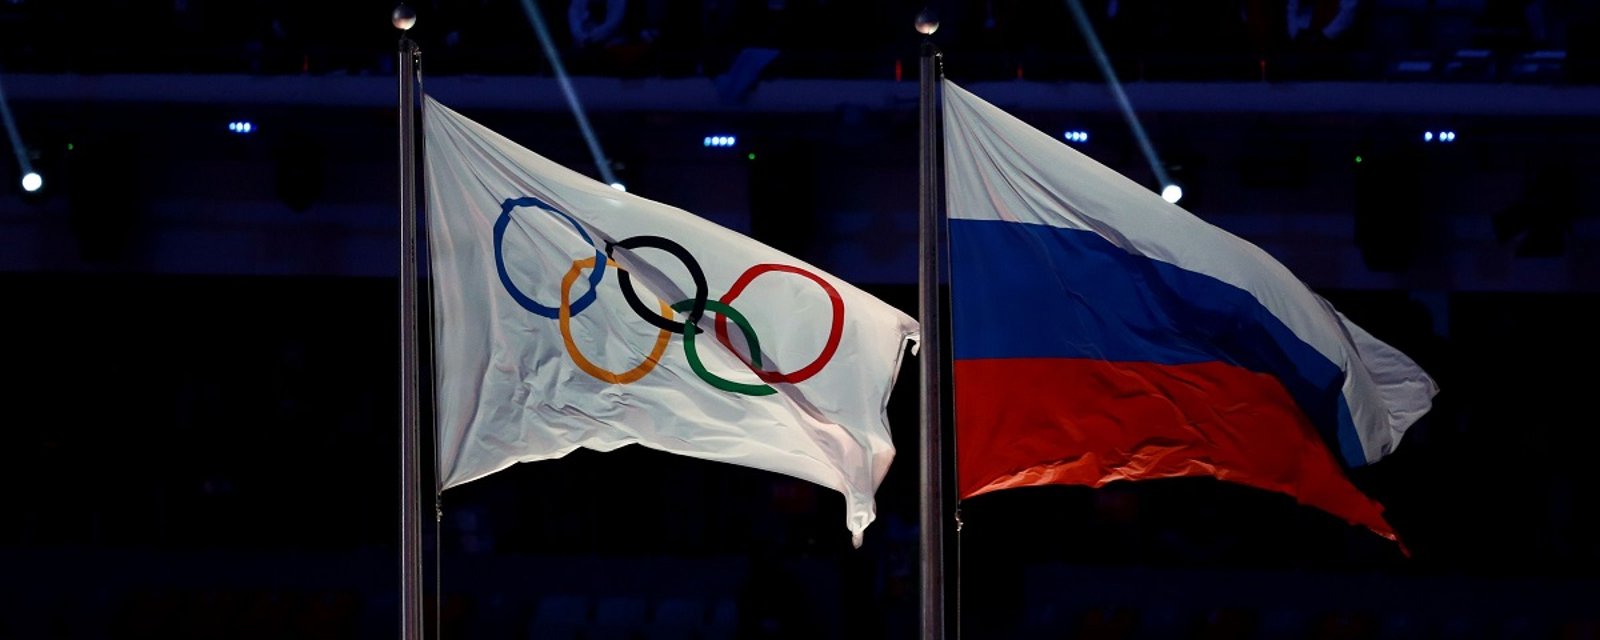 WADA bans Russia from all major sporting events, including the Olympics in Beijing.